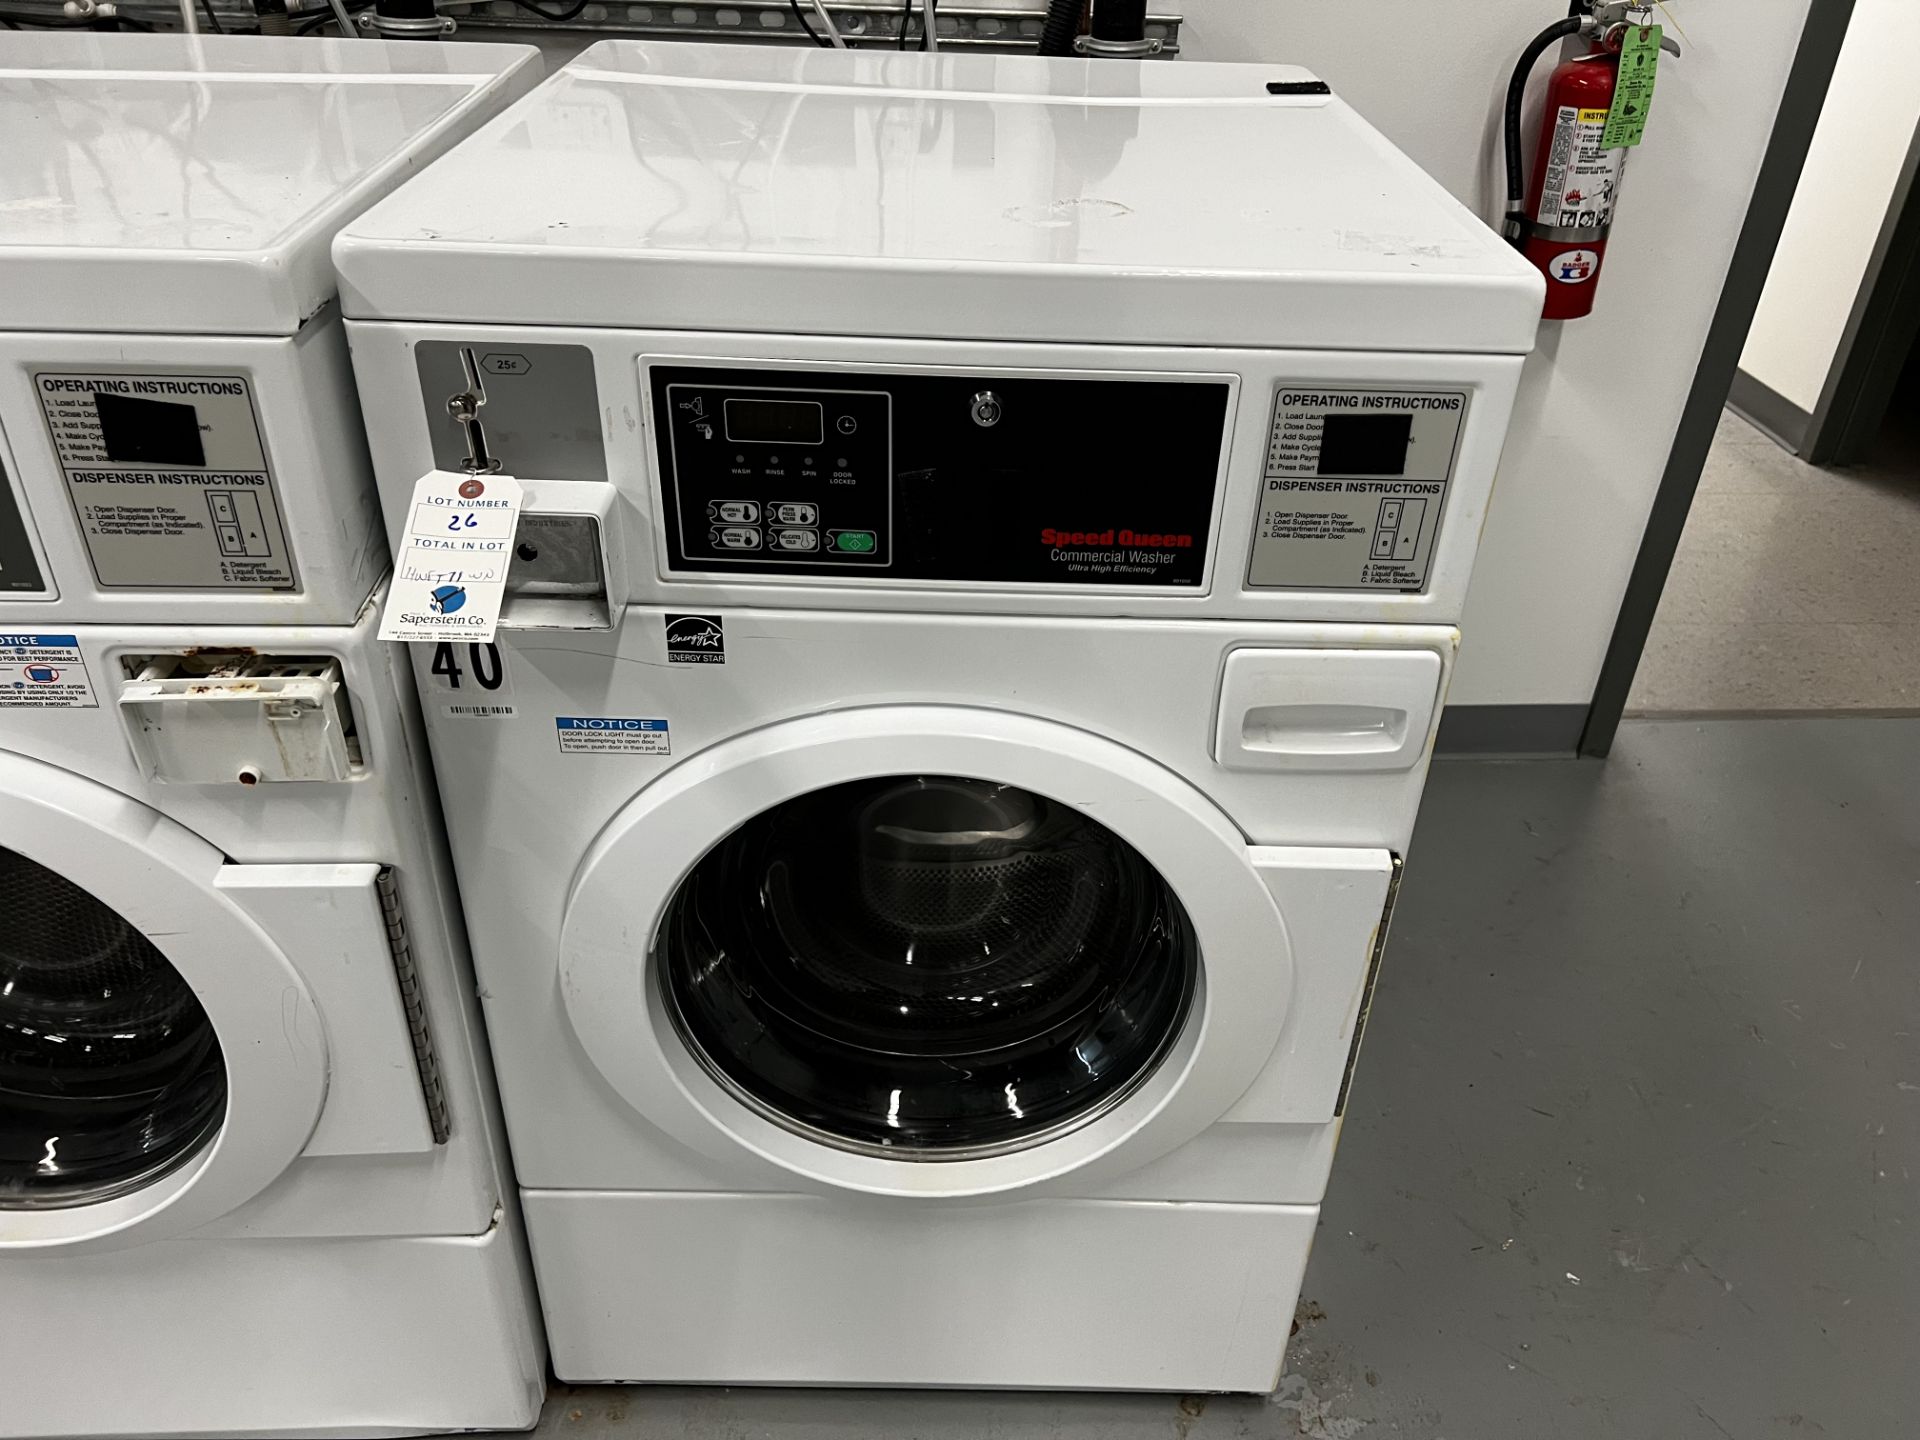 Speed Queen Model:HWFT71WN, SS Int. 18lb Commercial Washing Machine